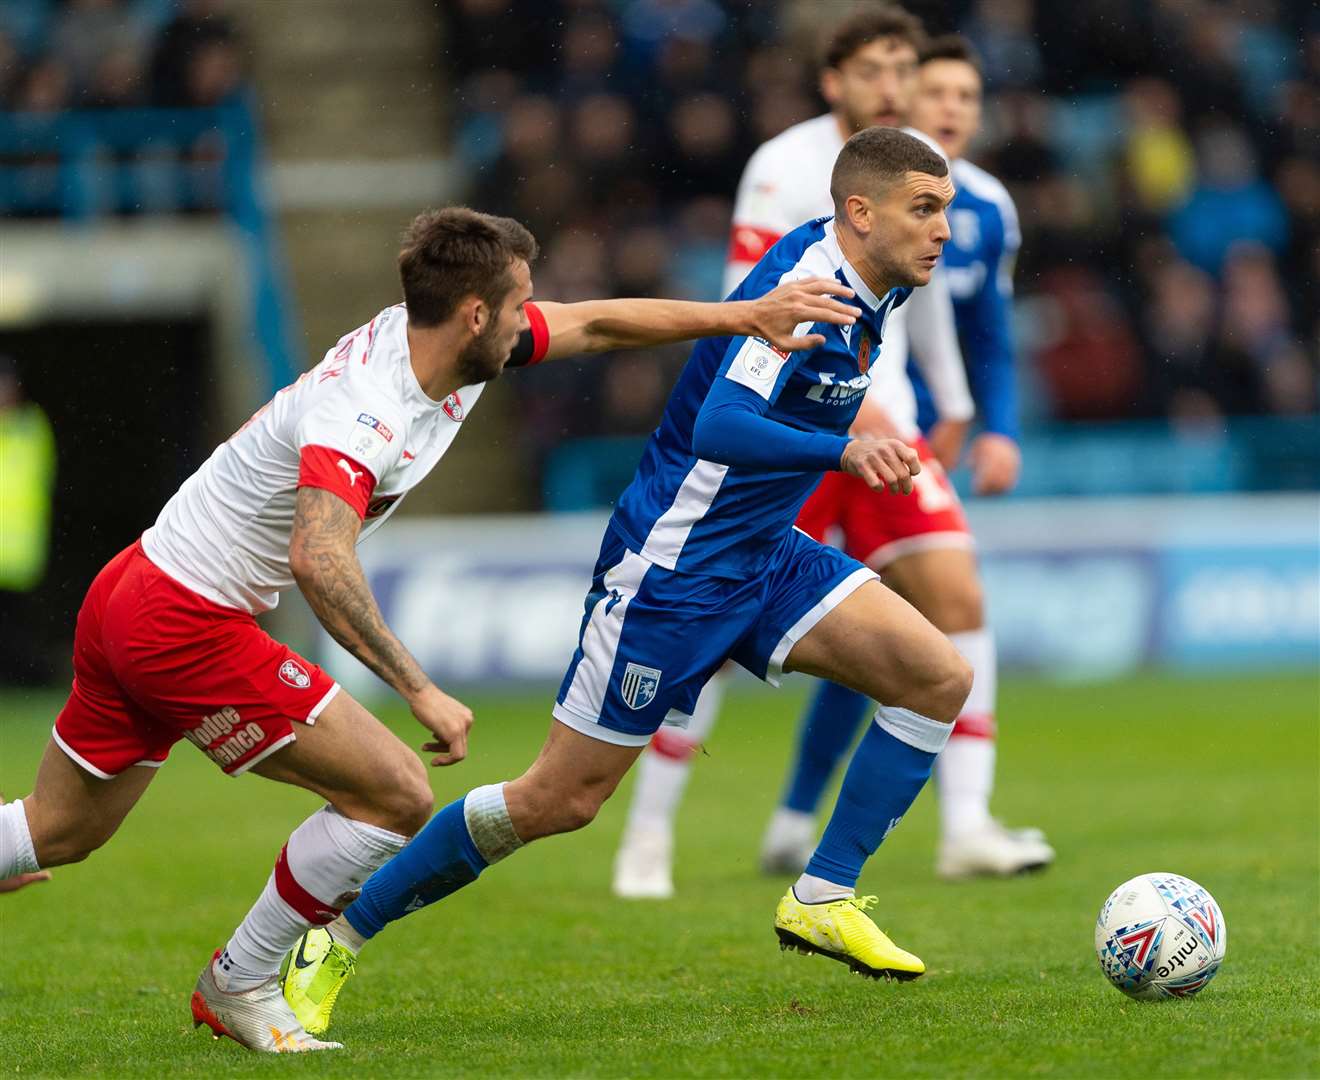 Gillingham's stand-in skipper Stuart O'Keefe in action against Rotherham United in 2019